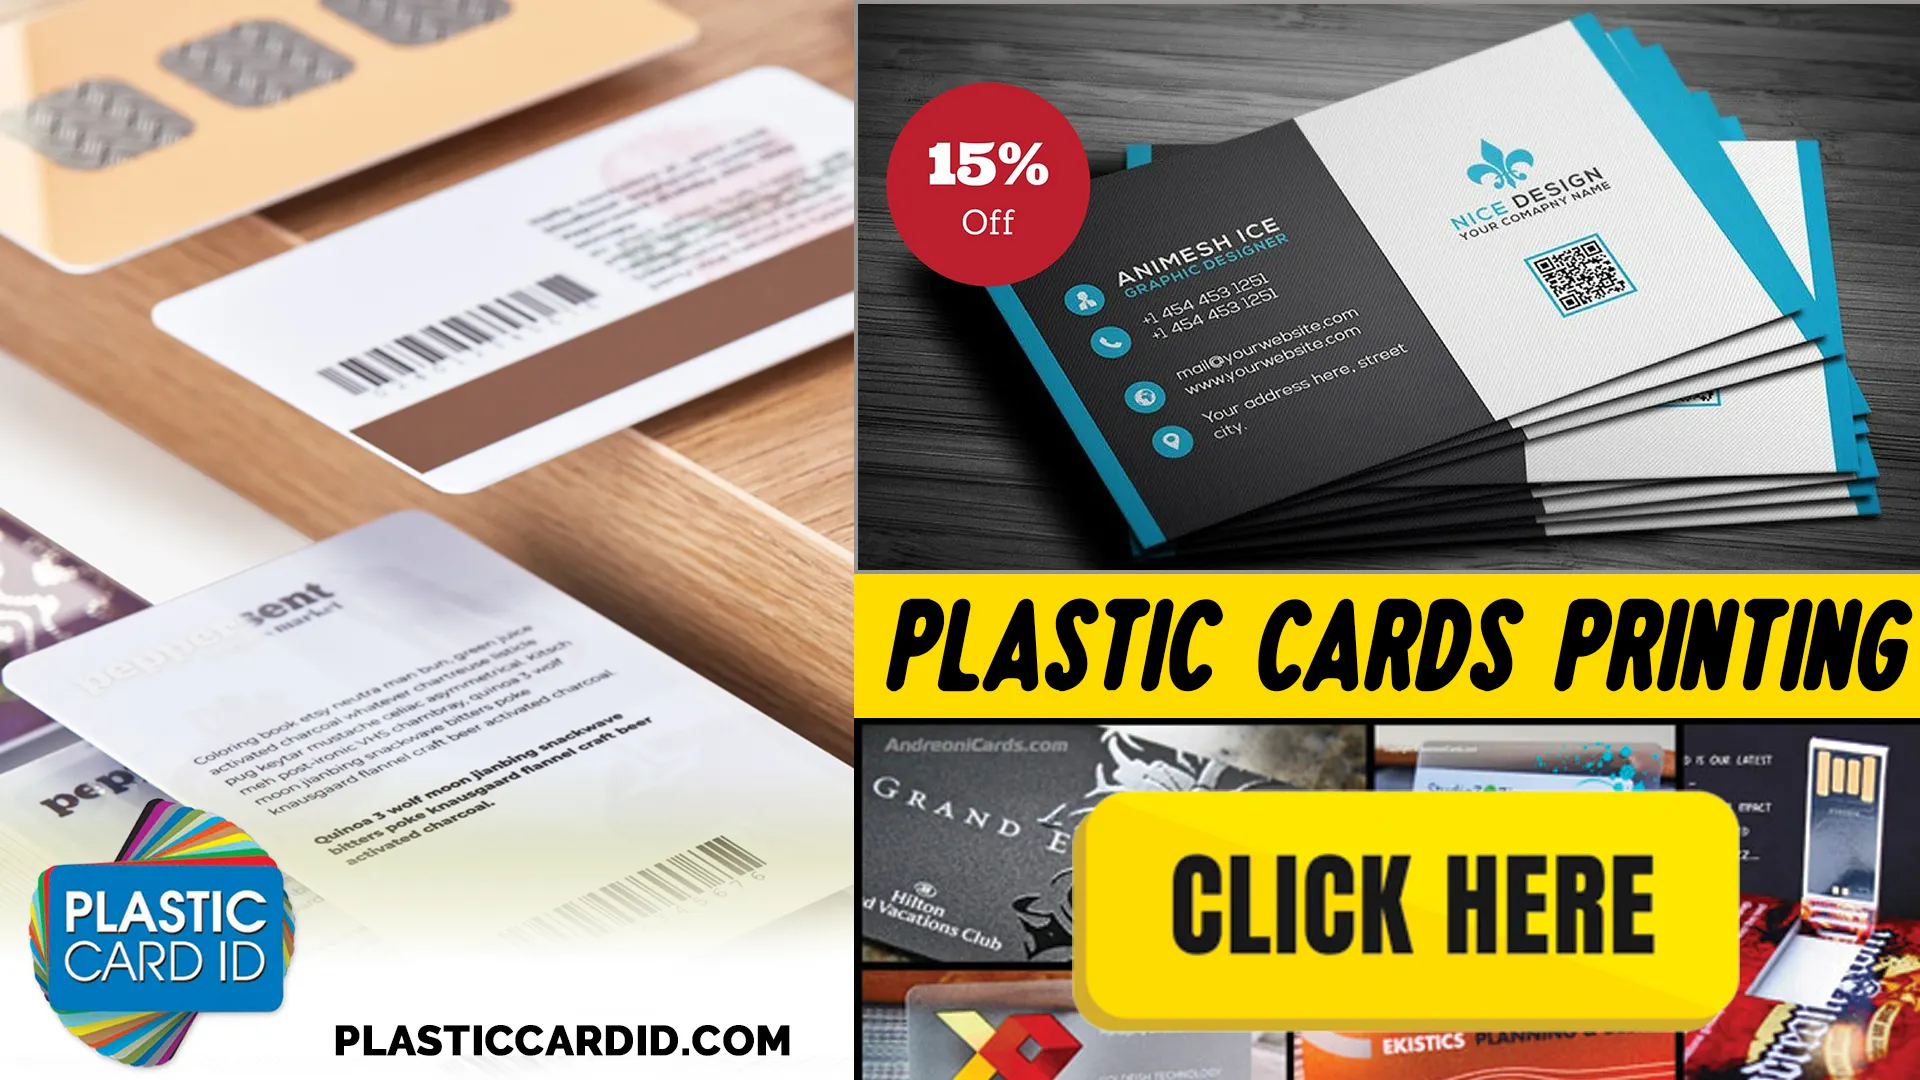 Welcome to the World of Plastic Card ID




: Excellence in Plastic Cards